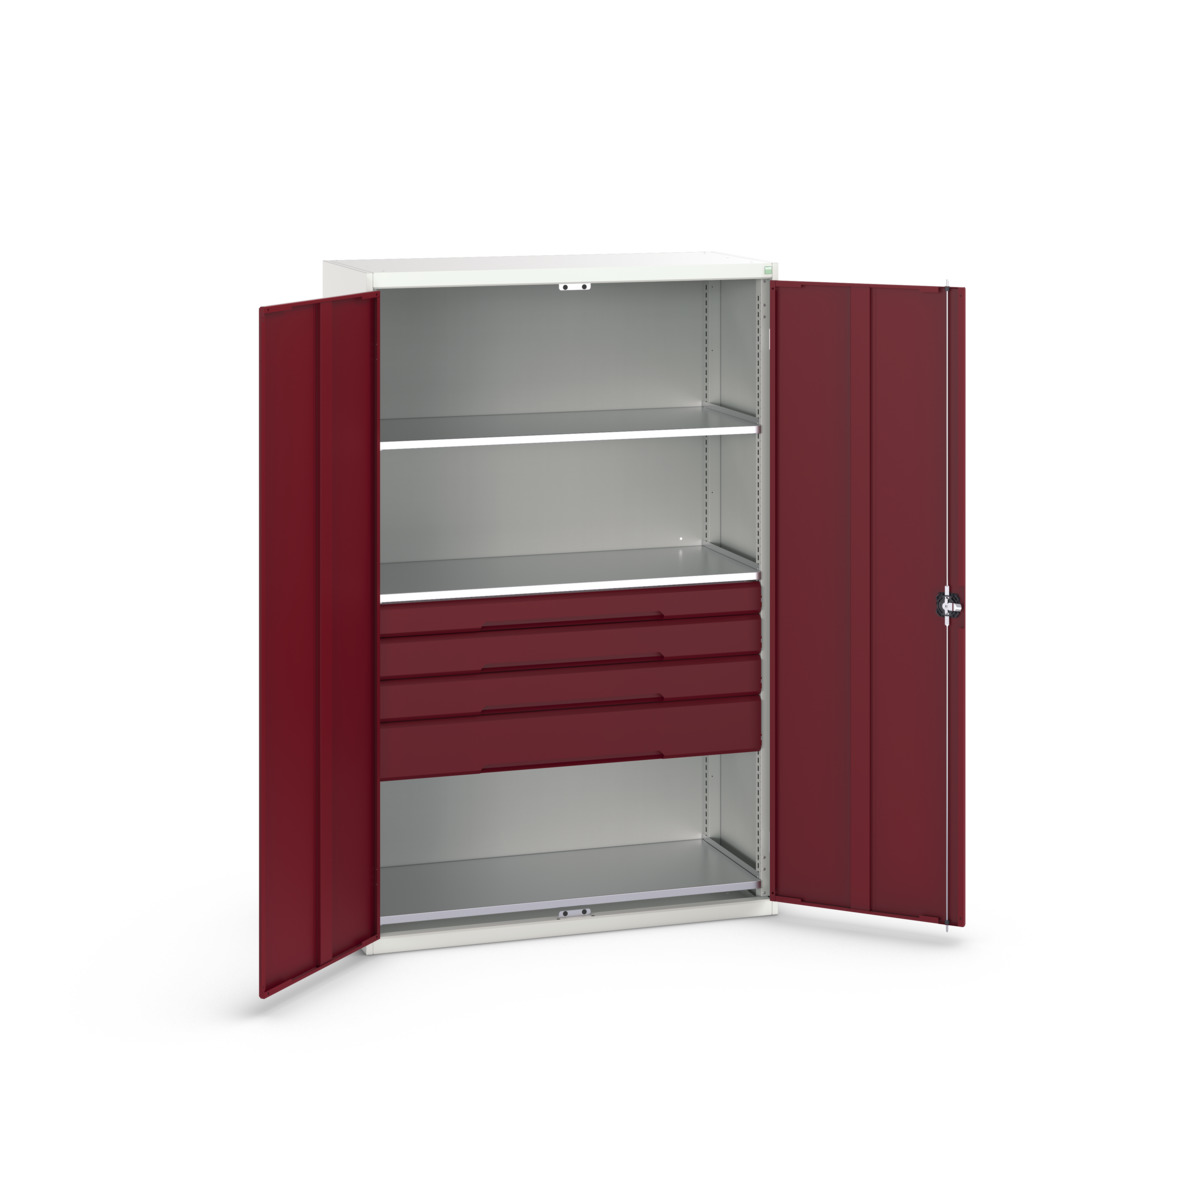 16926656.24 - verso kitted cupboard